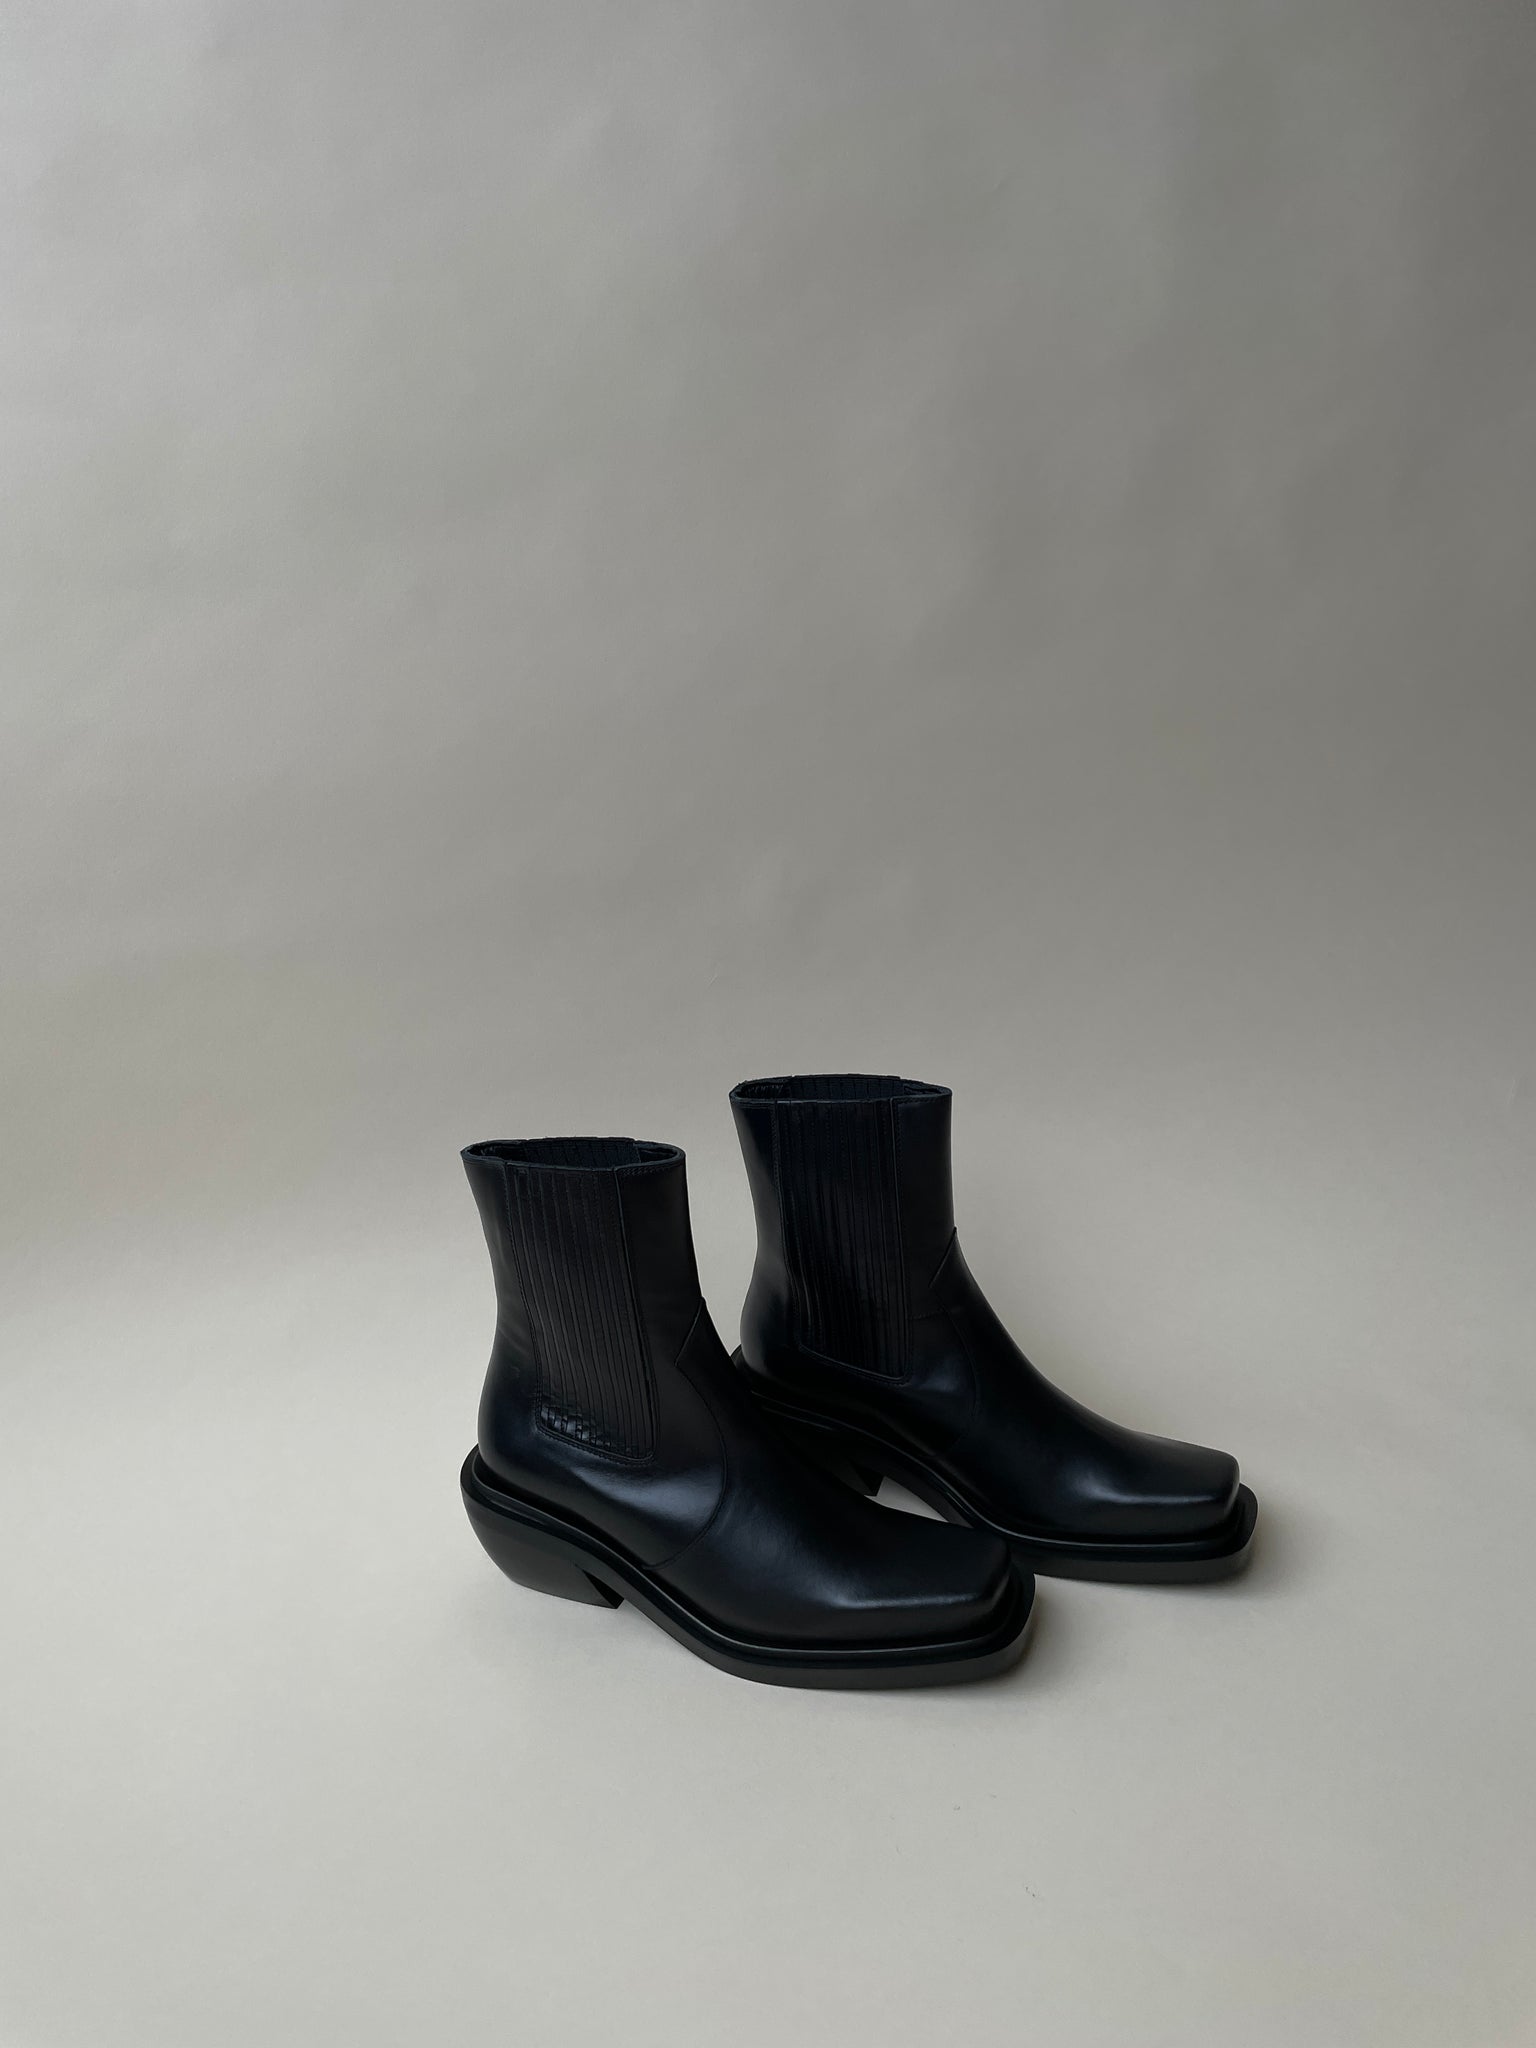 The Ranch Black Leather Boot